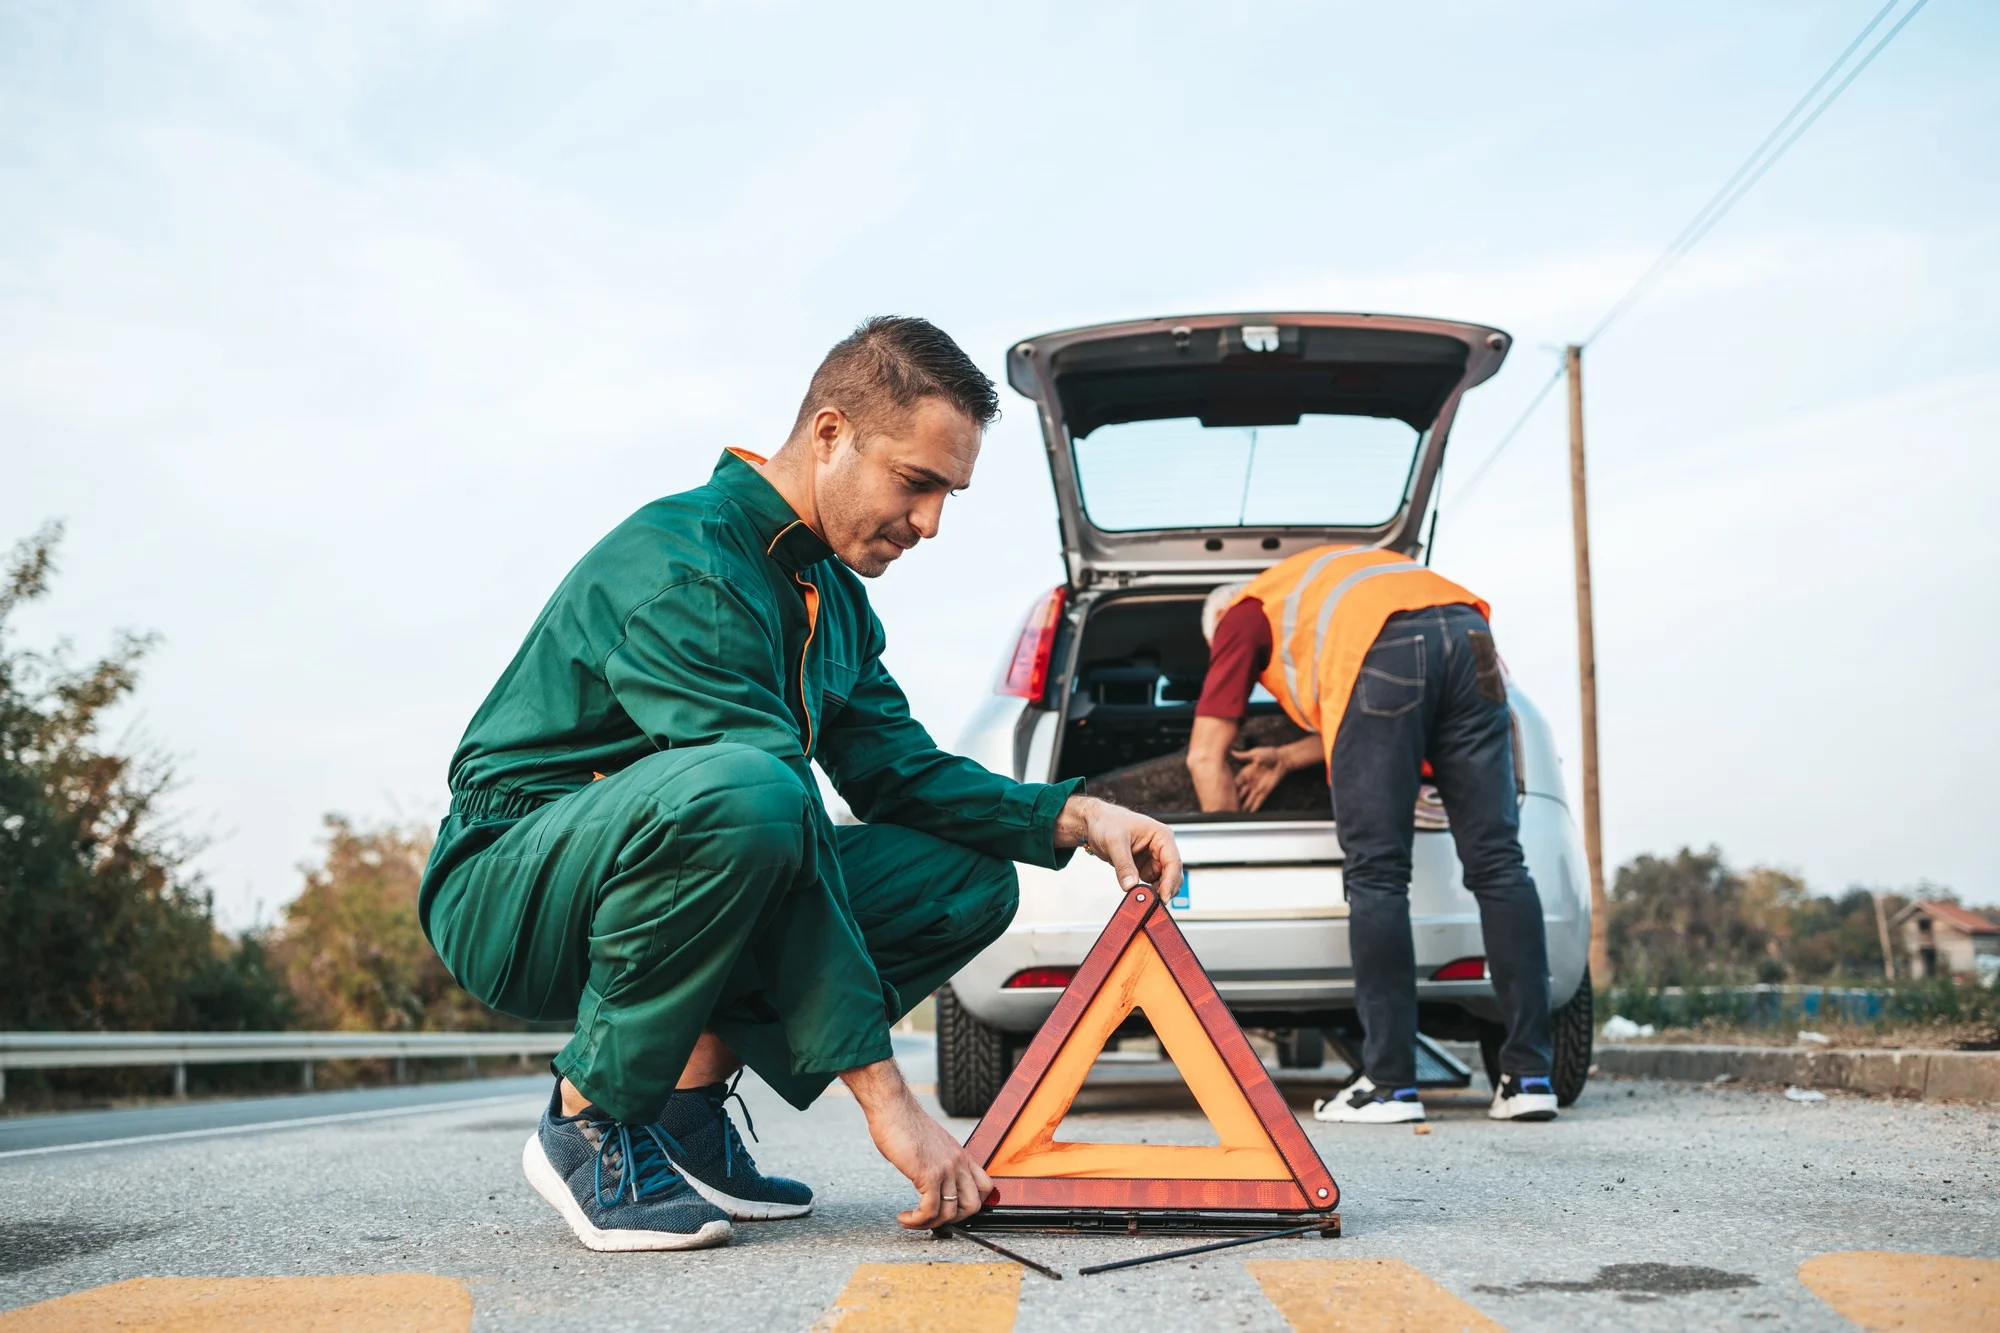 Reliable 24/7 Roadside Assistance Service in Texas